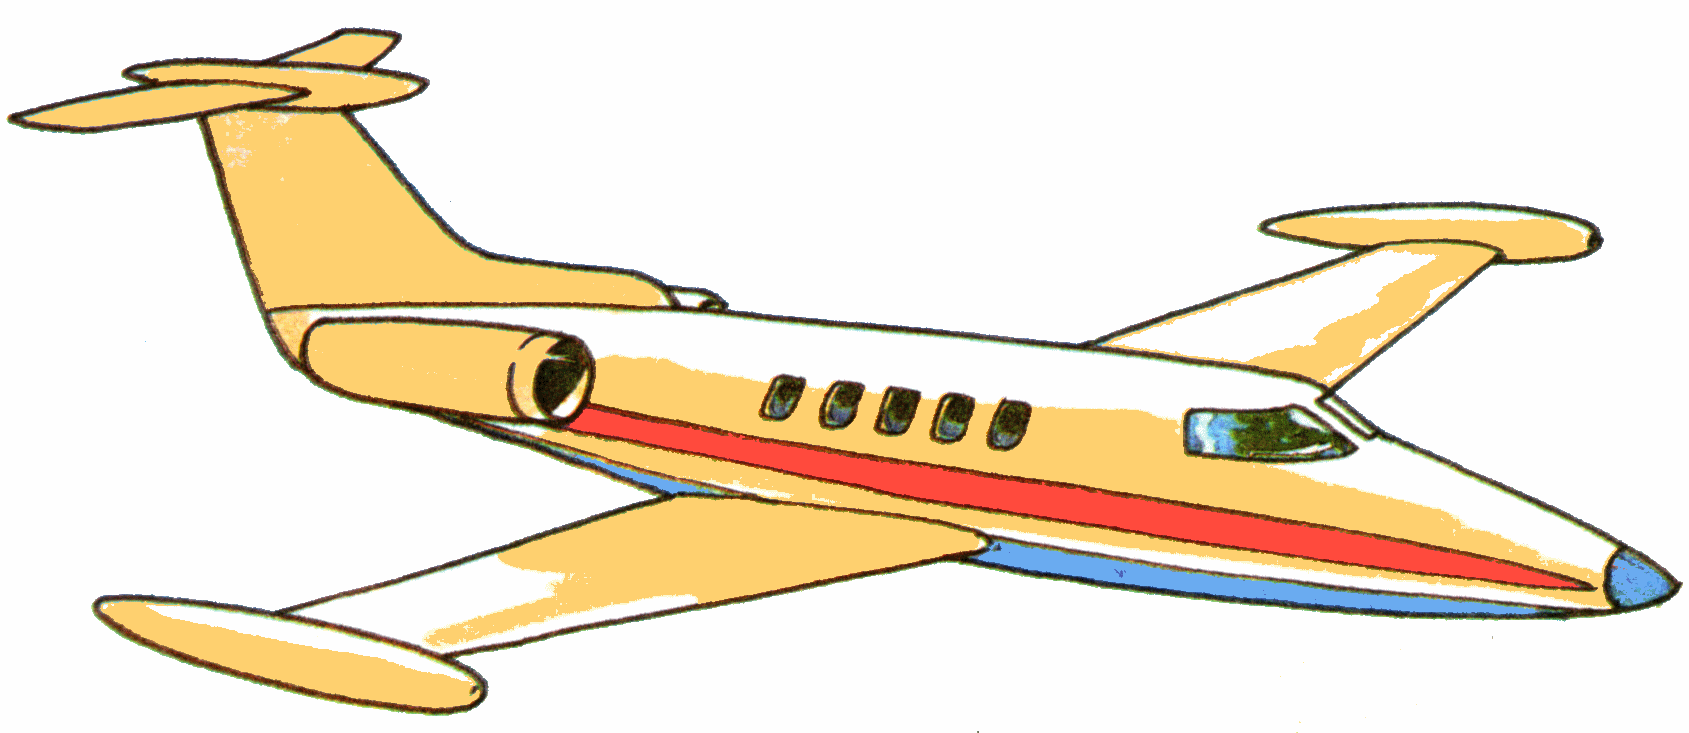 clipart of plane - photo #35